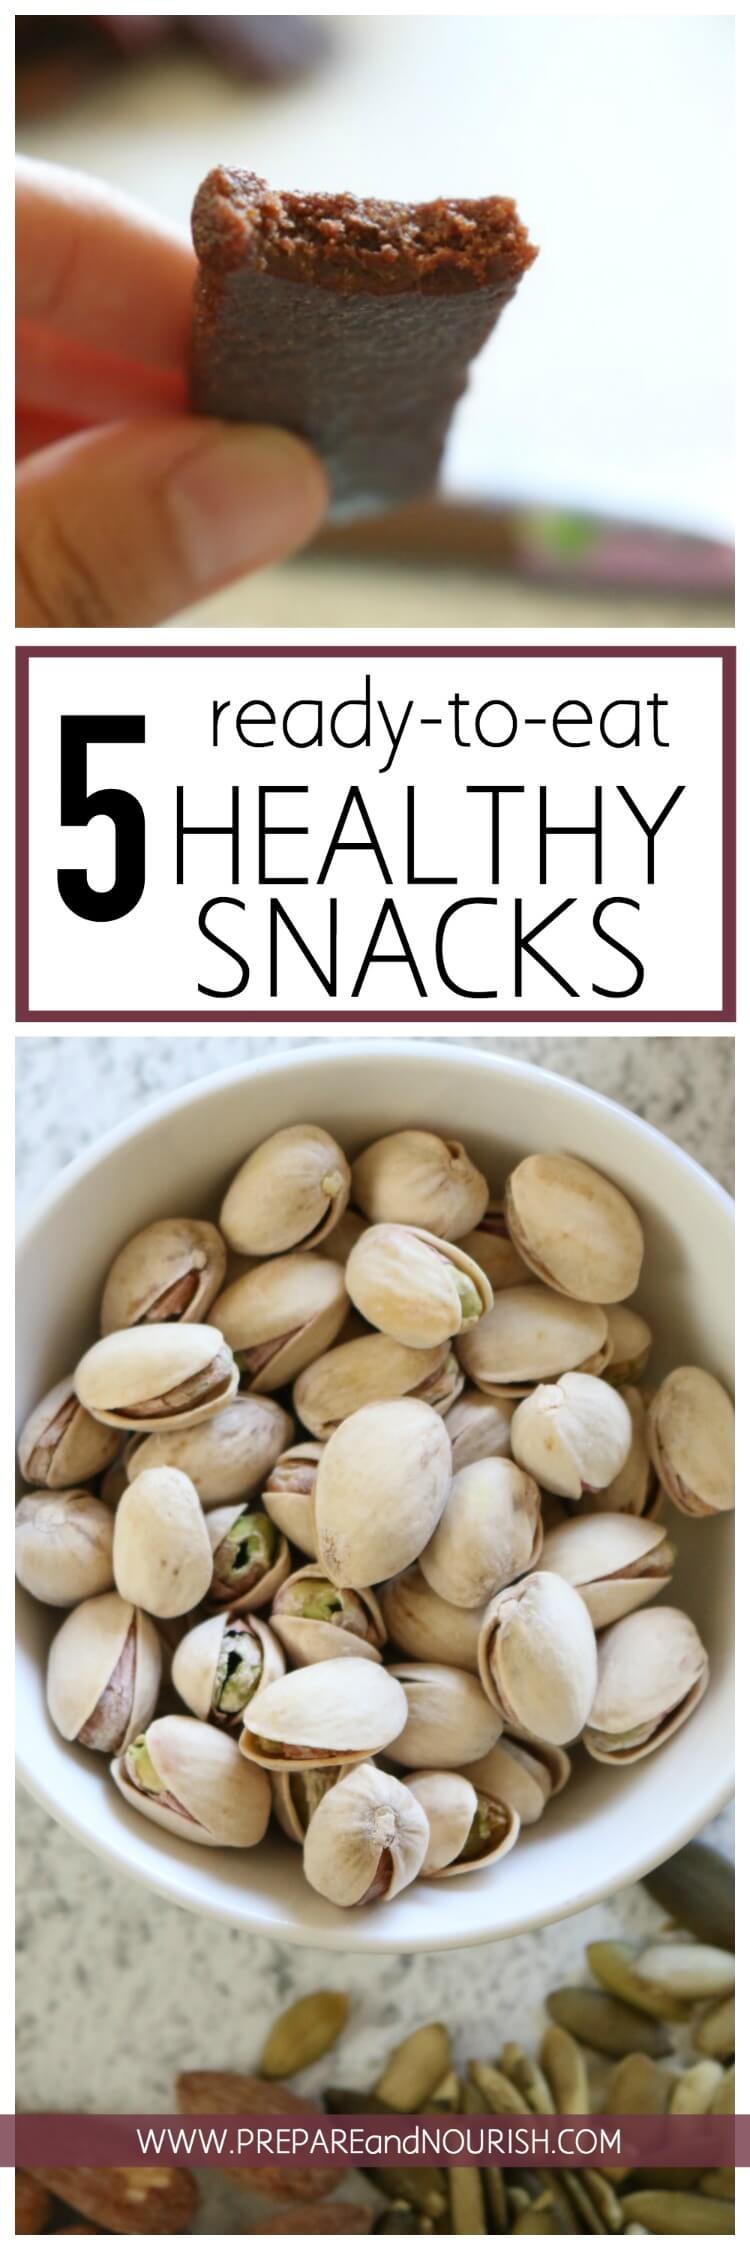 5 Ready-to-Eat Healthy Snacks - These FIVE ready to eat, no-fuss, no-prep healthy snacks are great for those in busy seasons.